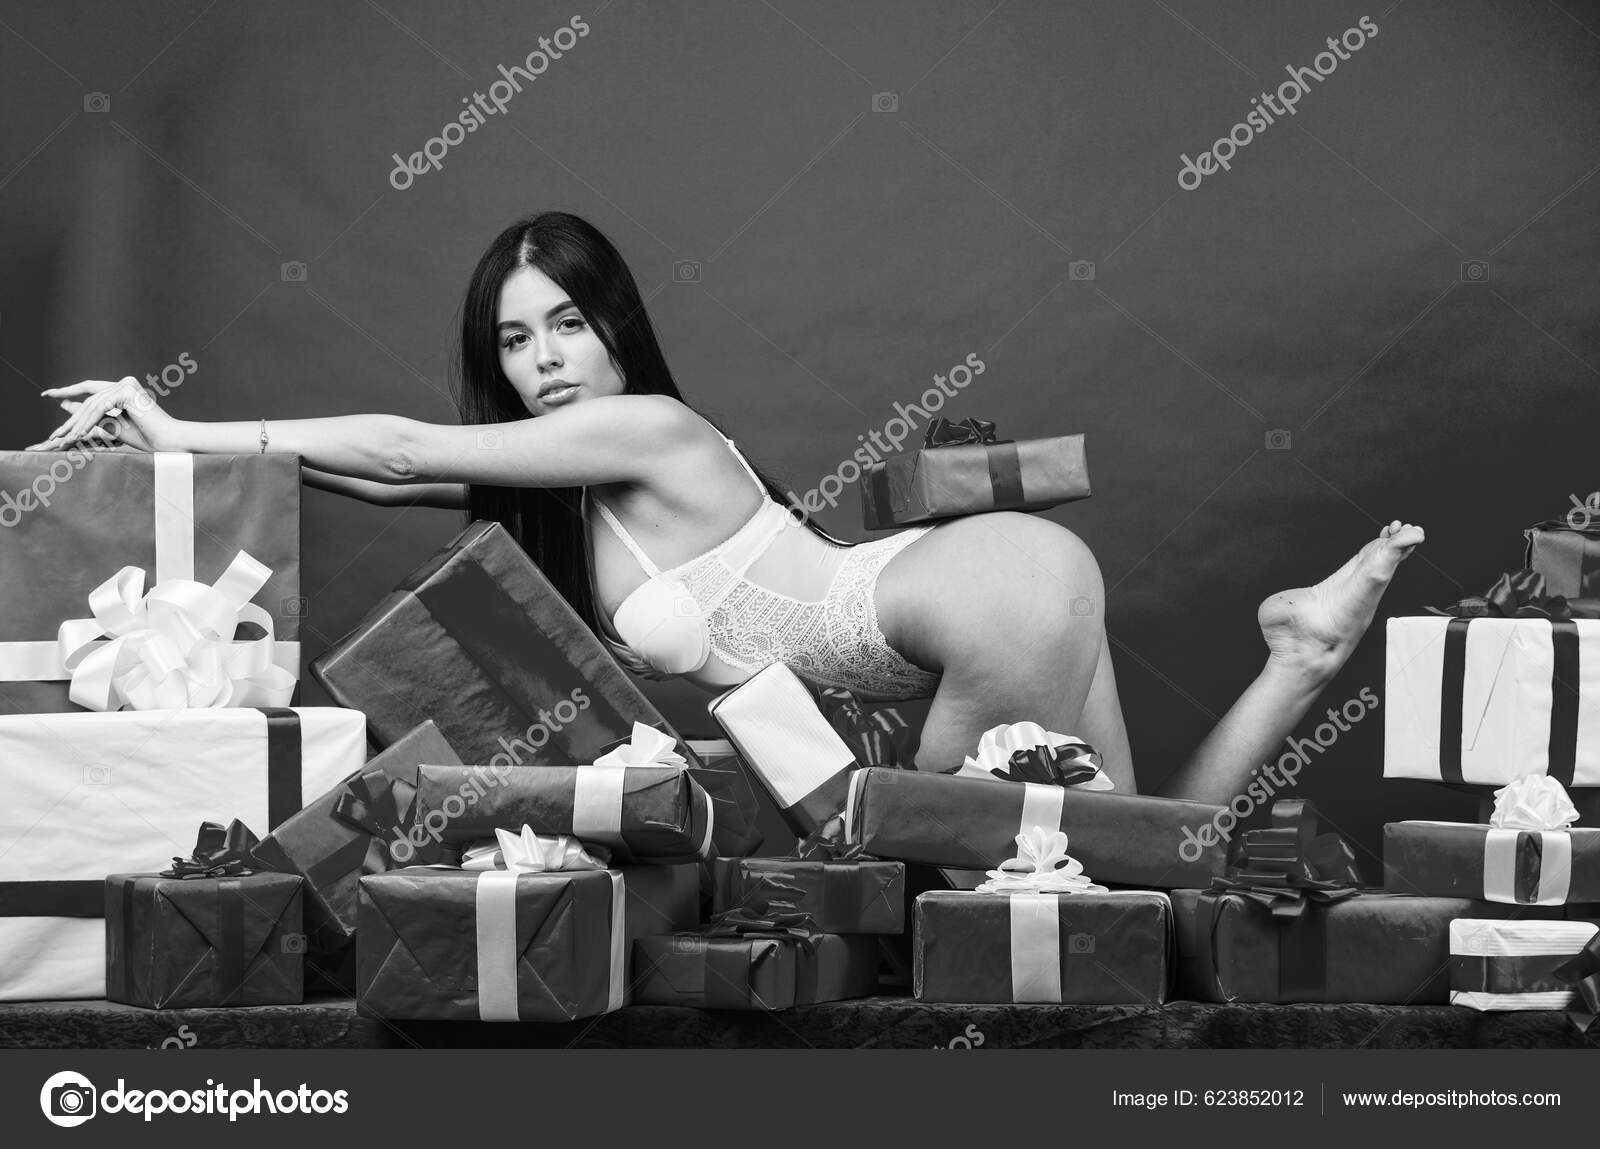 Richness Wellbeing Sexy Lady Pick Gifts Sexy Girl Wear Lingerie Stock Photo by ©stetsik 623852012 pic